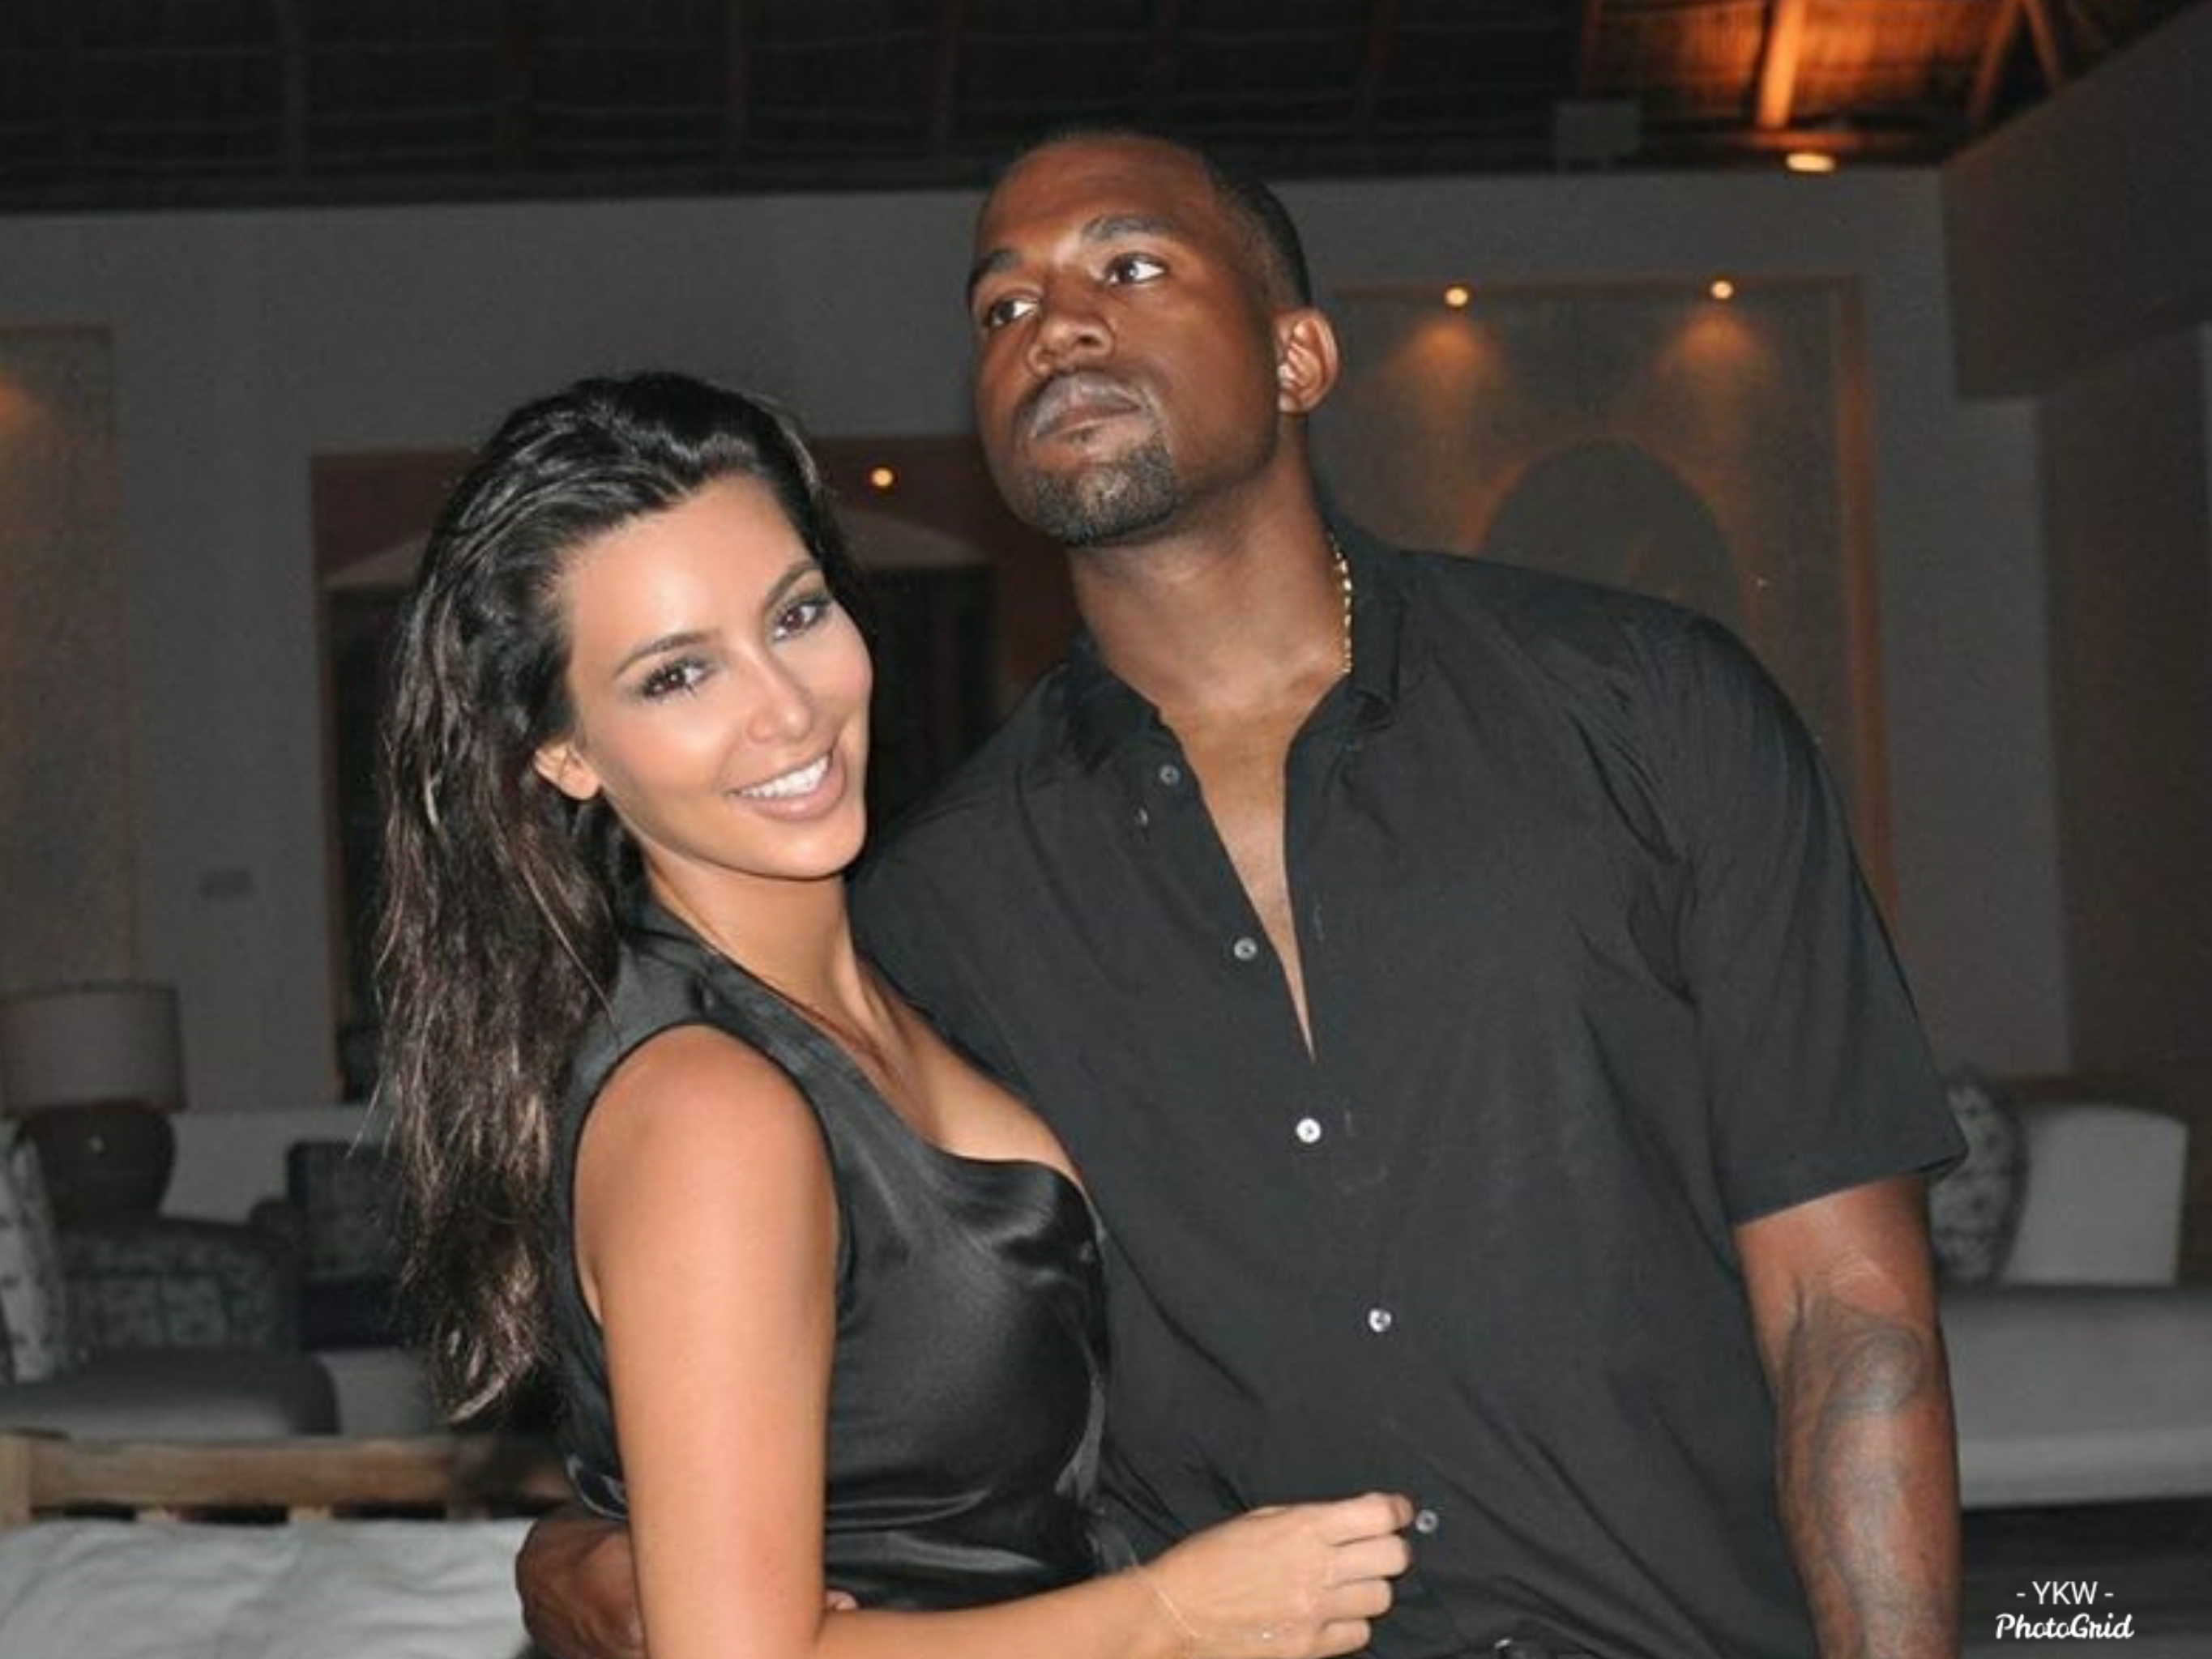 Kanye West Claims He’s Been Trying To Divorce Kim Kardashian, She Asks Public For Compassion